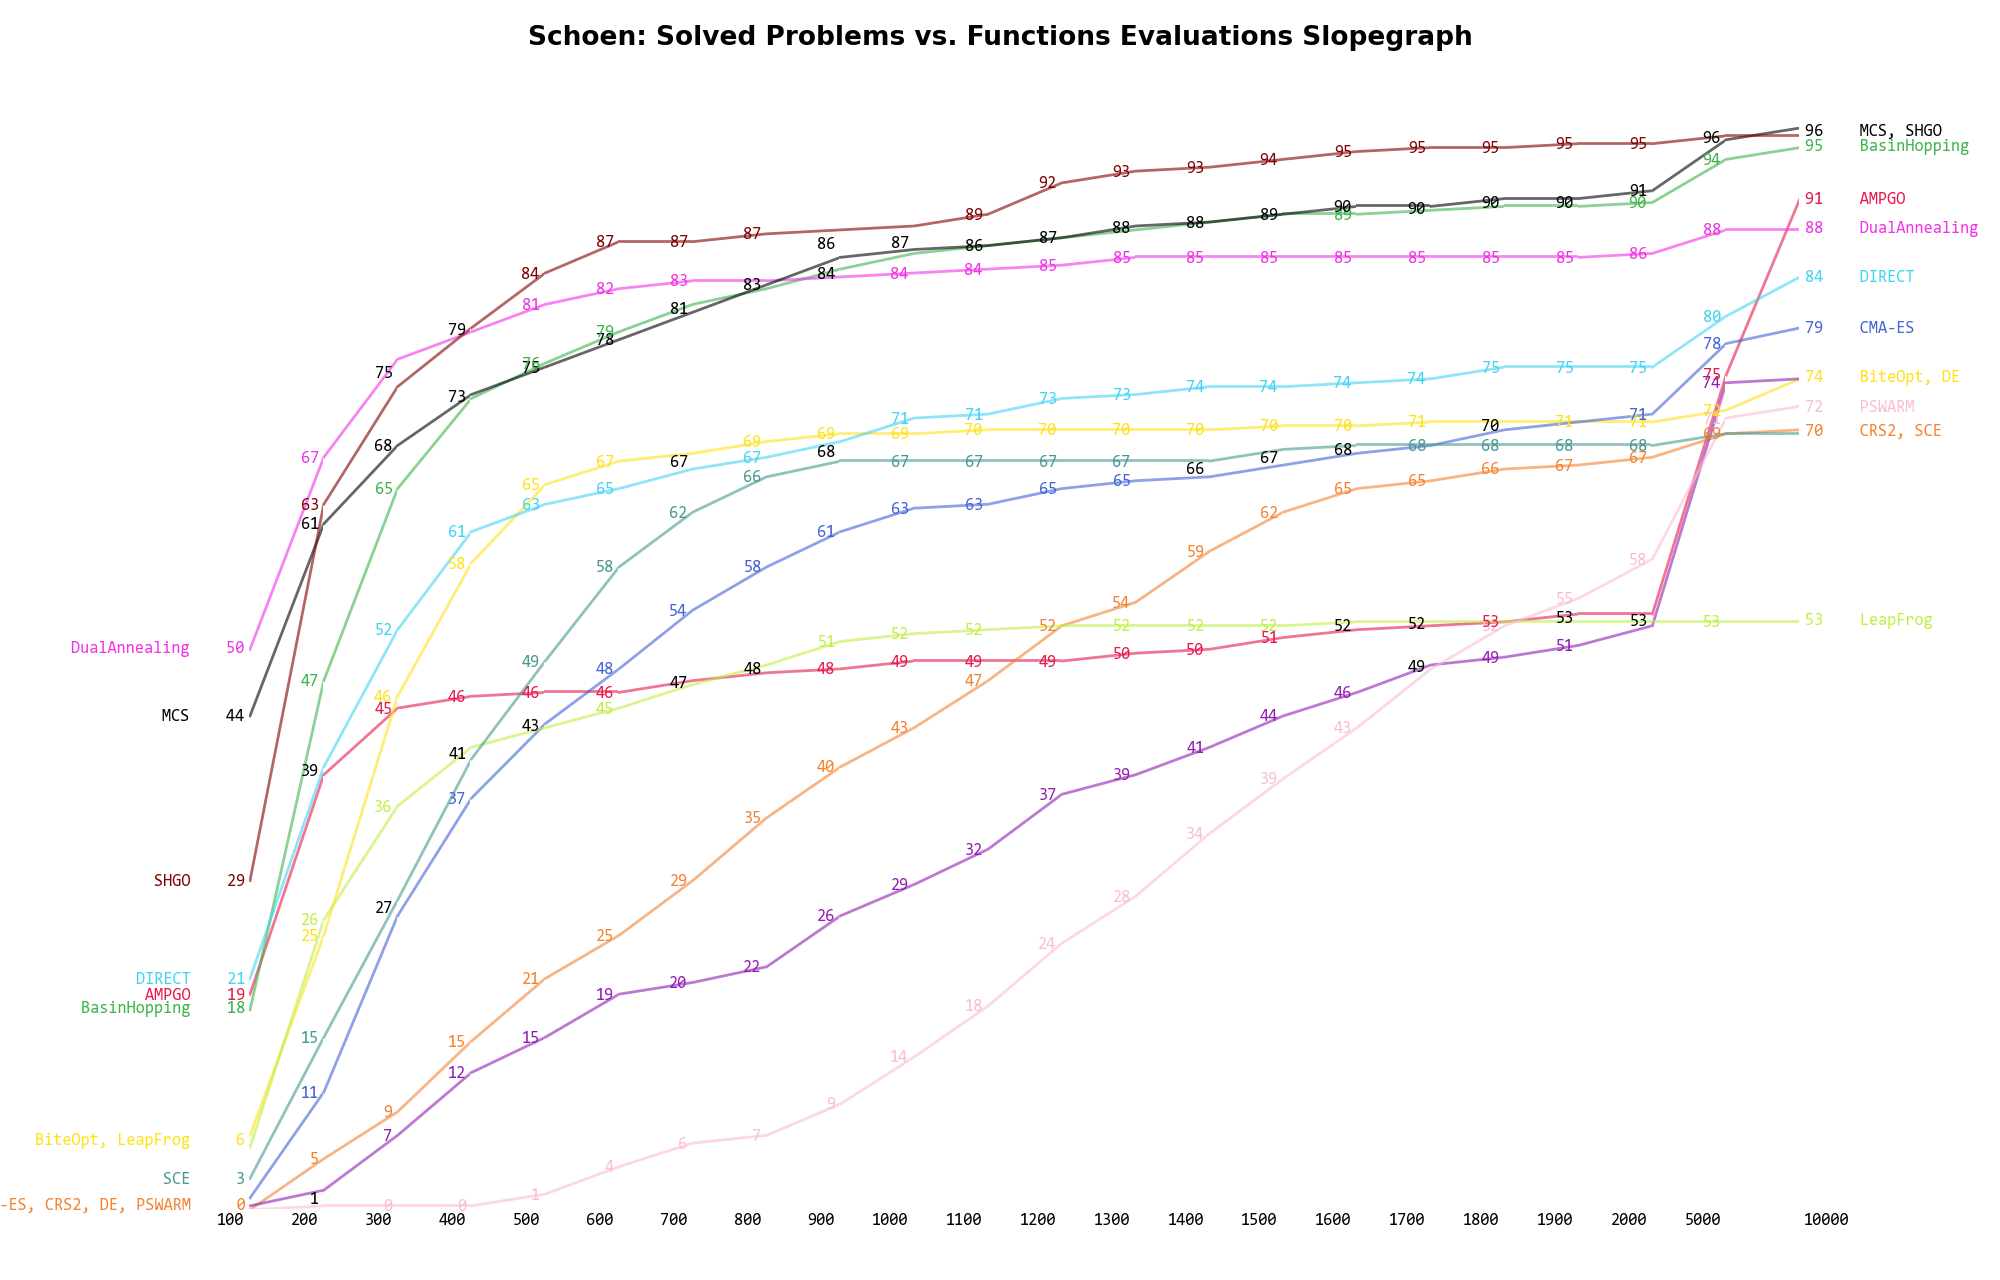 Percentage of problems solved given a fixed number of function evaluations on the Schoen test suite